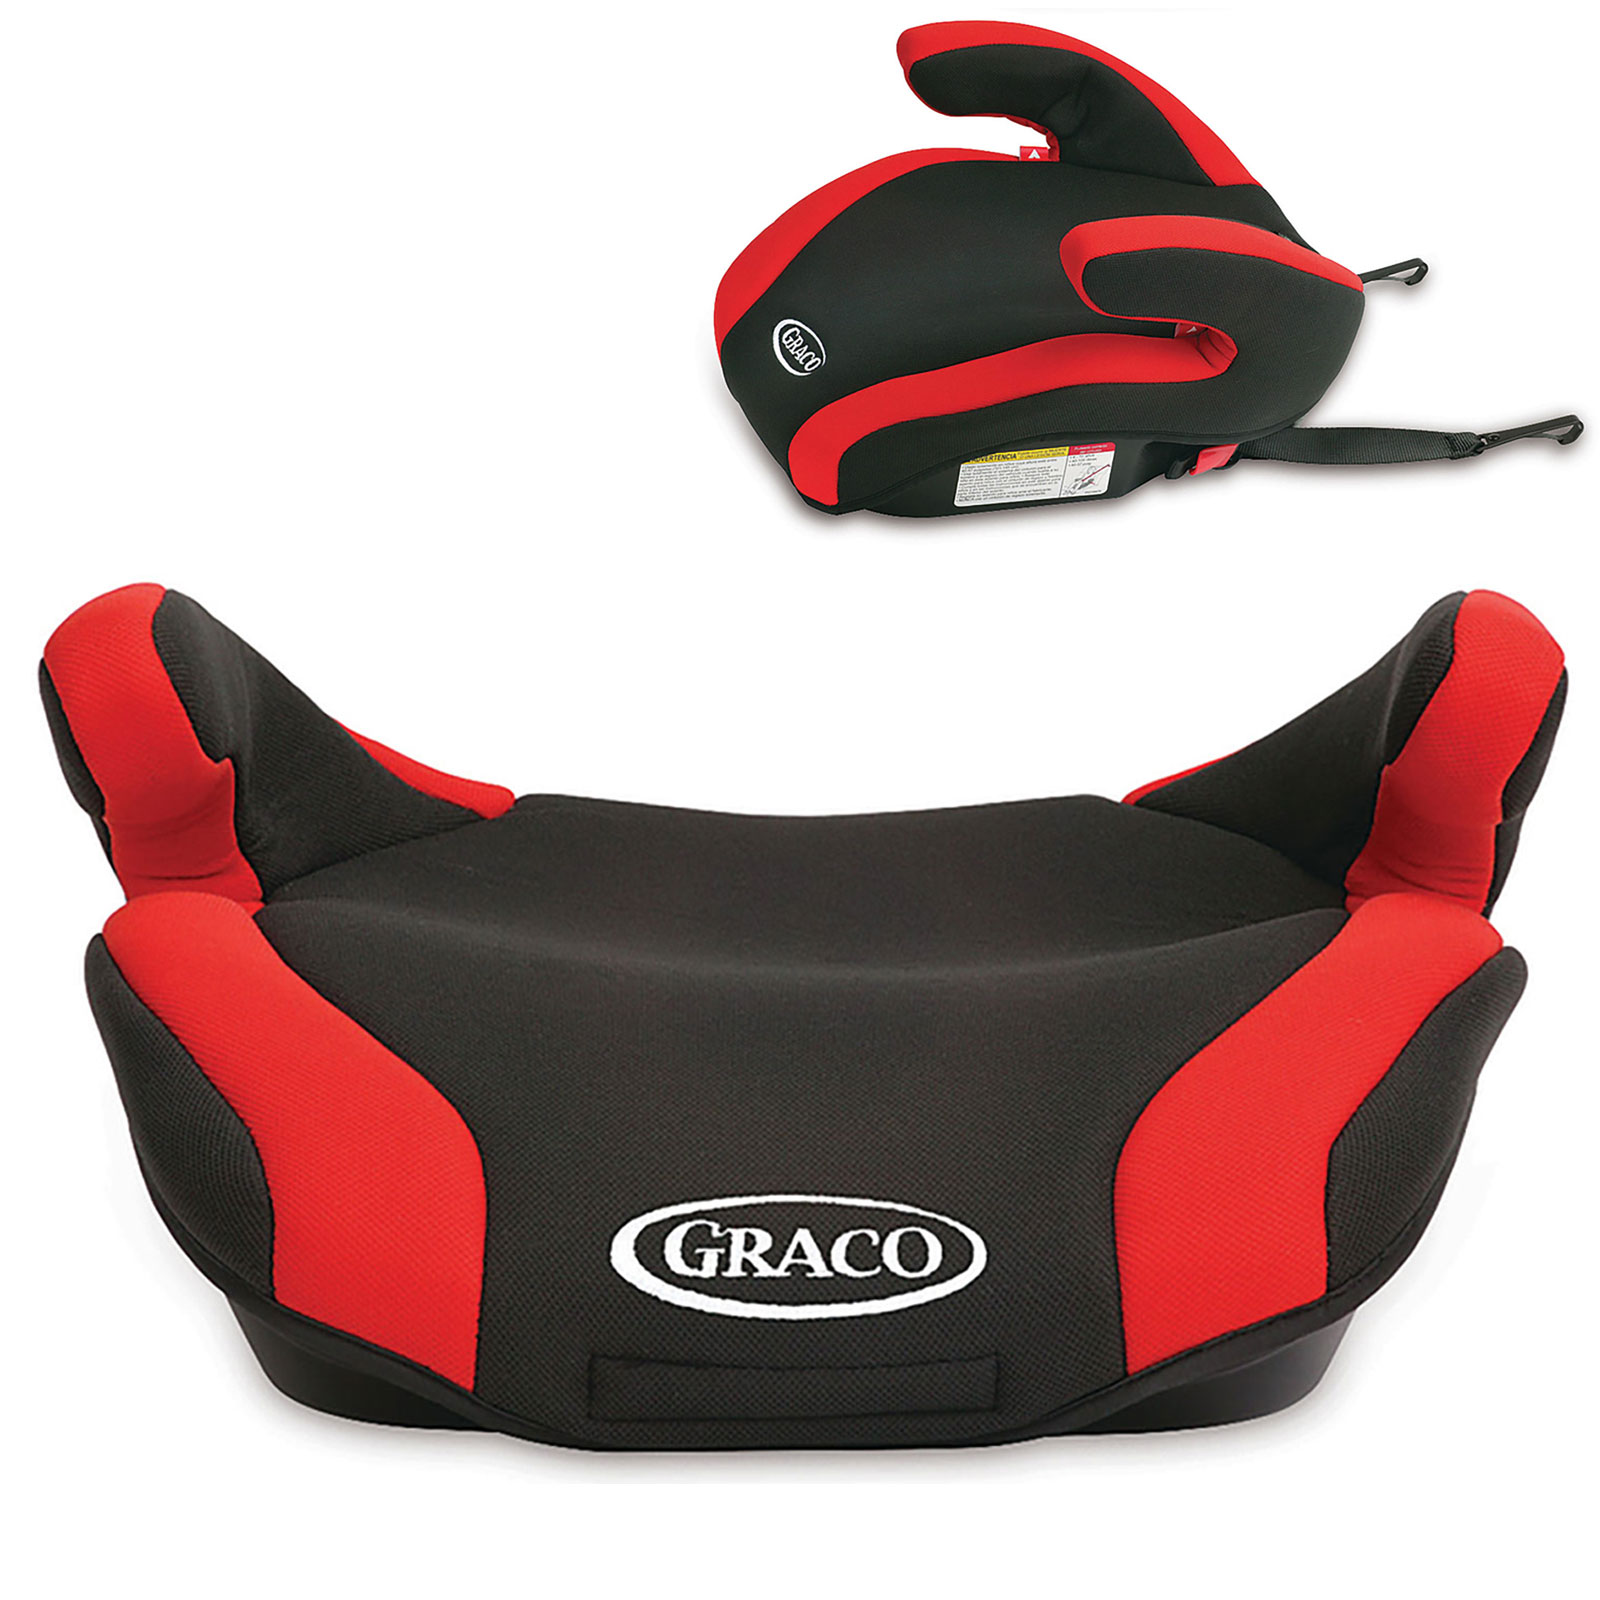 Graco Connext Group 3 Booster Car Seat - Diablo (6-12 Years)